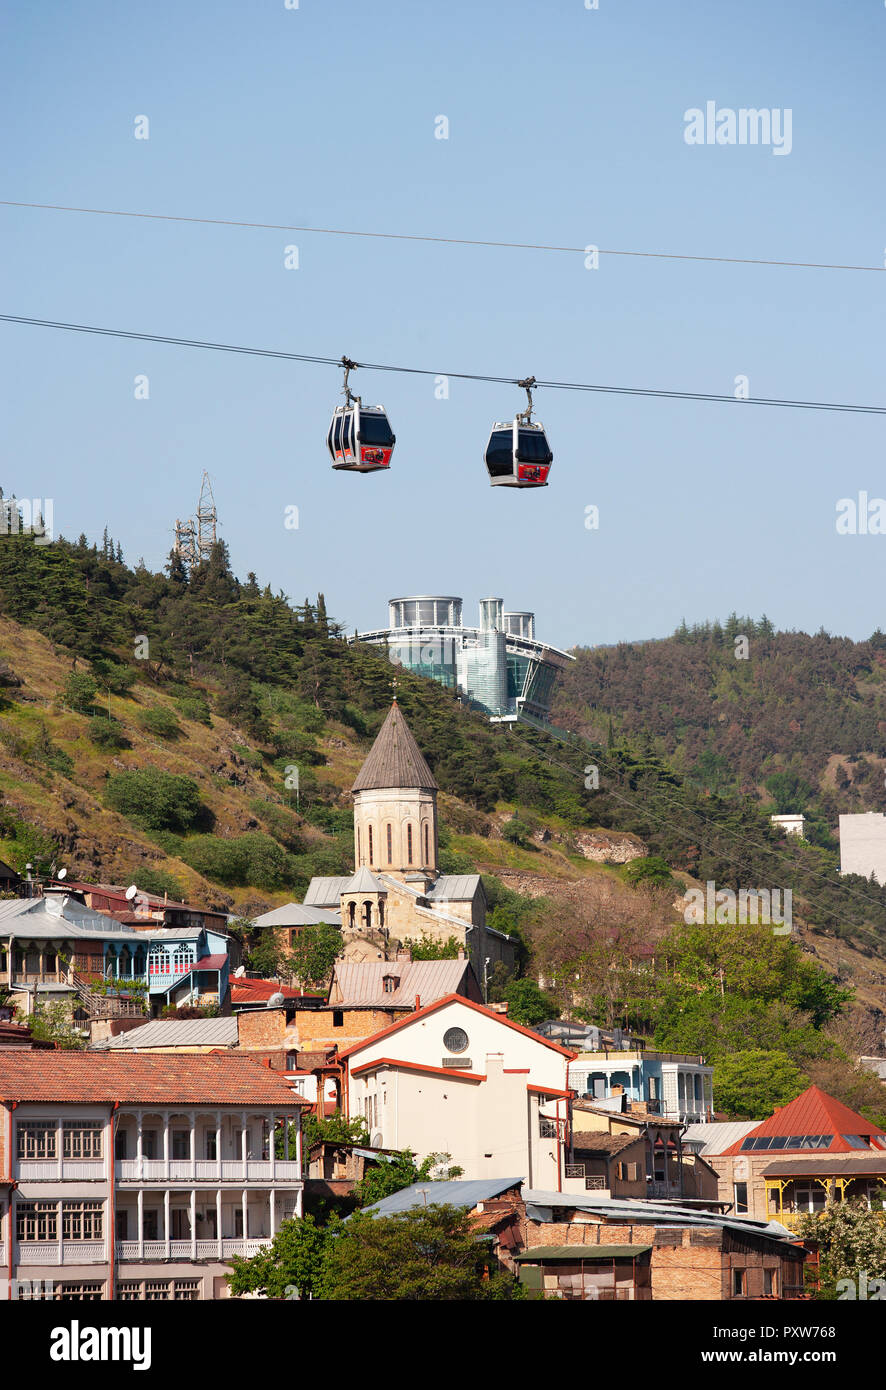 Georgia, Tbilisi, Cable car over old town Stock Photo